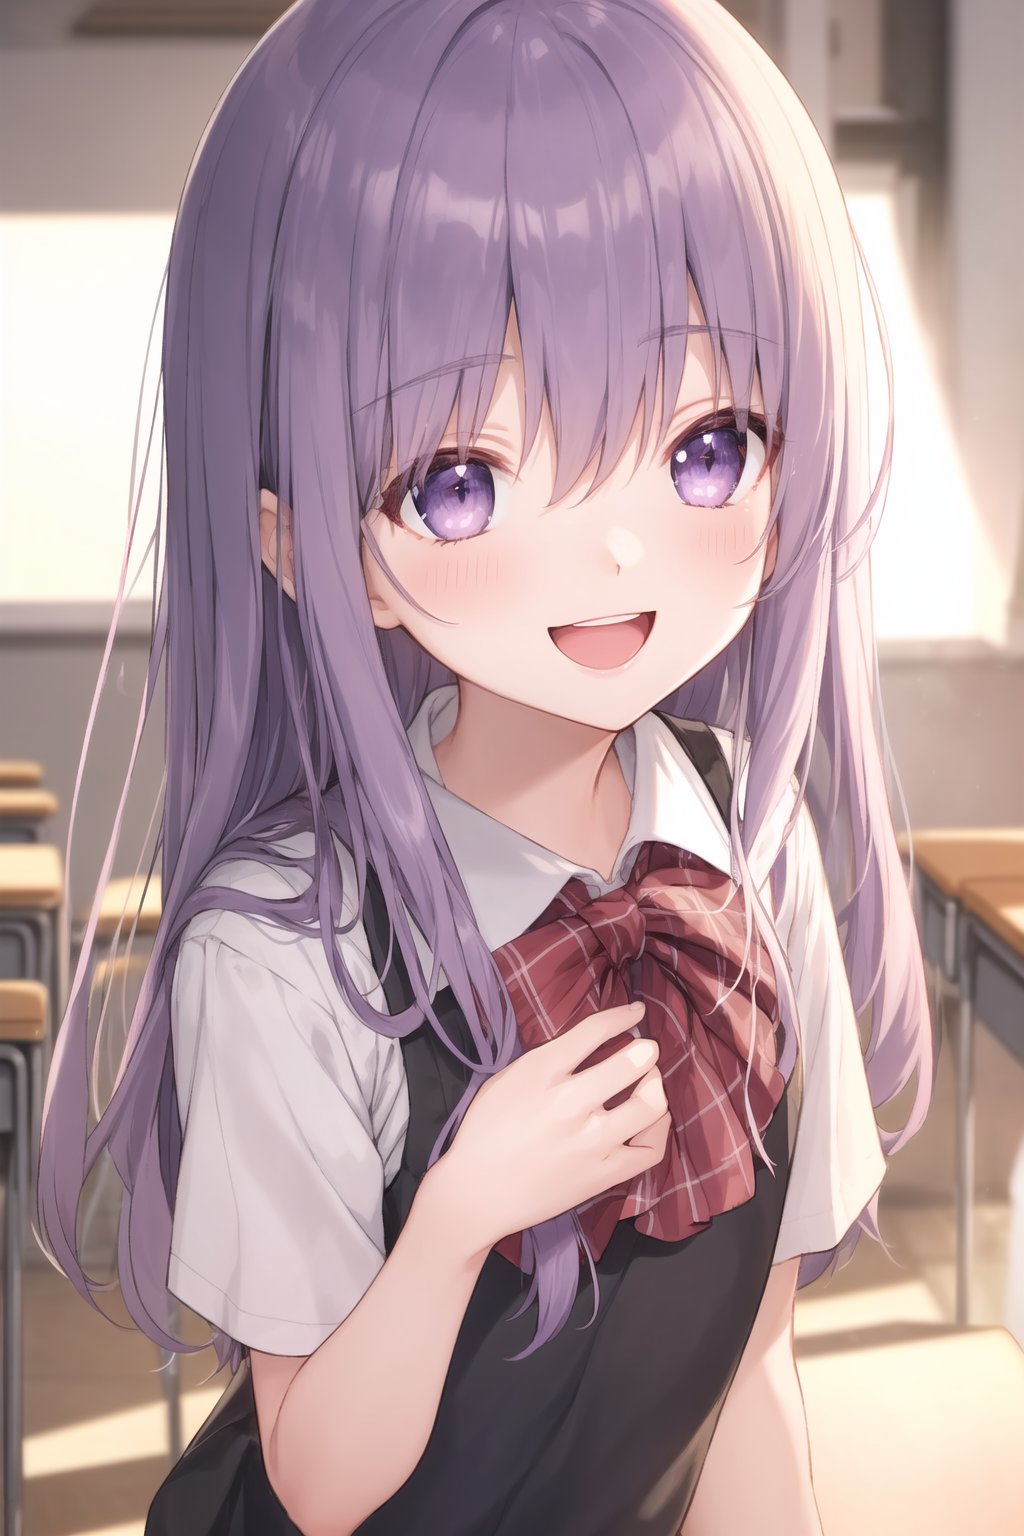 soft glowing light, bokeh effect, twilight, anime style, highly detailed,
a character with eyes narrowed from smiling, anime style, joyful expression, high detail, vibrant colors, 8k resolution, highly detailed face, sharp features, Extending a hand, morning , cloudy,
pastel colors:1.2,(8k,best quality), (highly detailed beautiful face and eyes),((classroom)),
((warming sunlight:1.5)),
BREAK ((cute eyes)), ((upper body)), ((looking up)), school uniform, short sleeve white blouse,
(light purple eyes),(17 years old girl), (1girl), (light purple hair),(long hair:1.1),wavy hair:1.1,(flat chest),hime cut,cute eyes,;d, happy smile,smile eyes,happy smile,cute eyes, ;>, ;d,